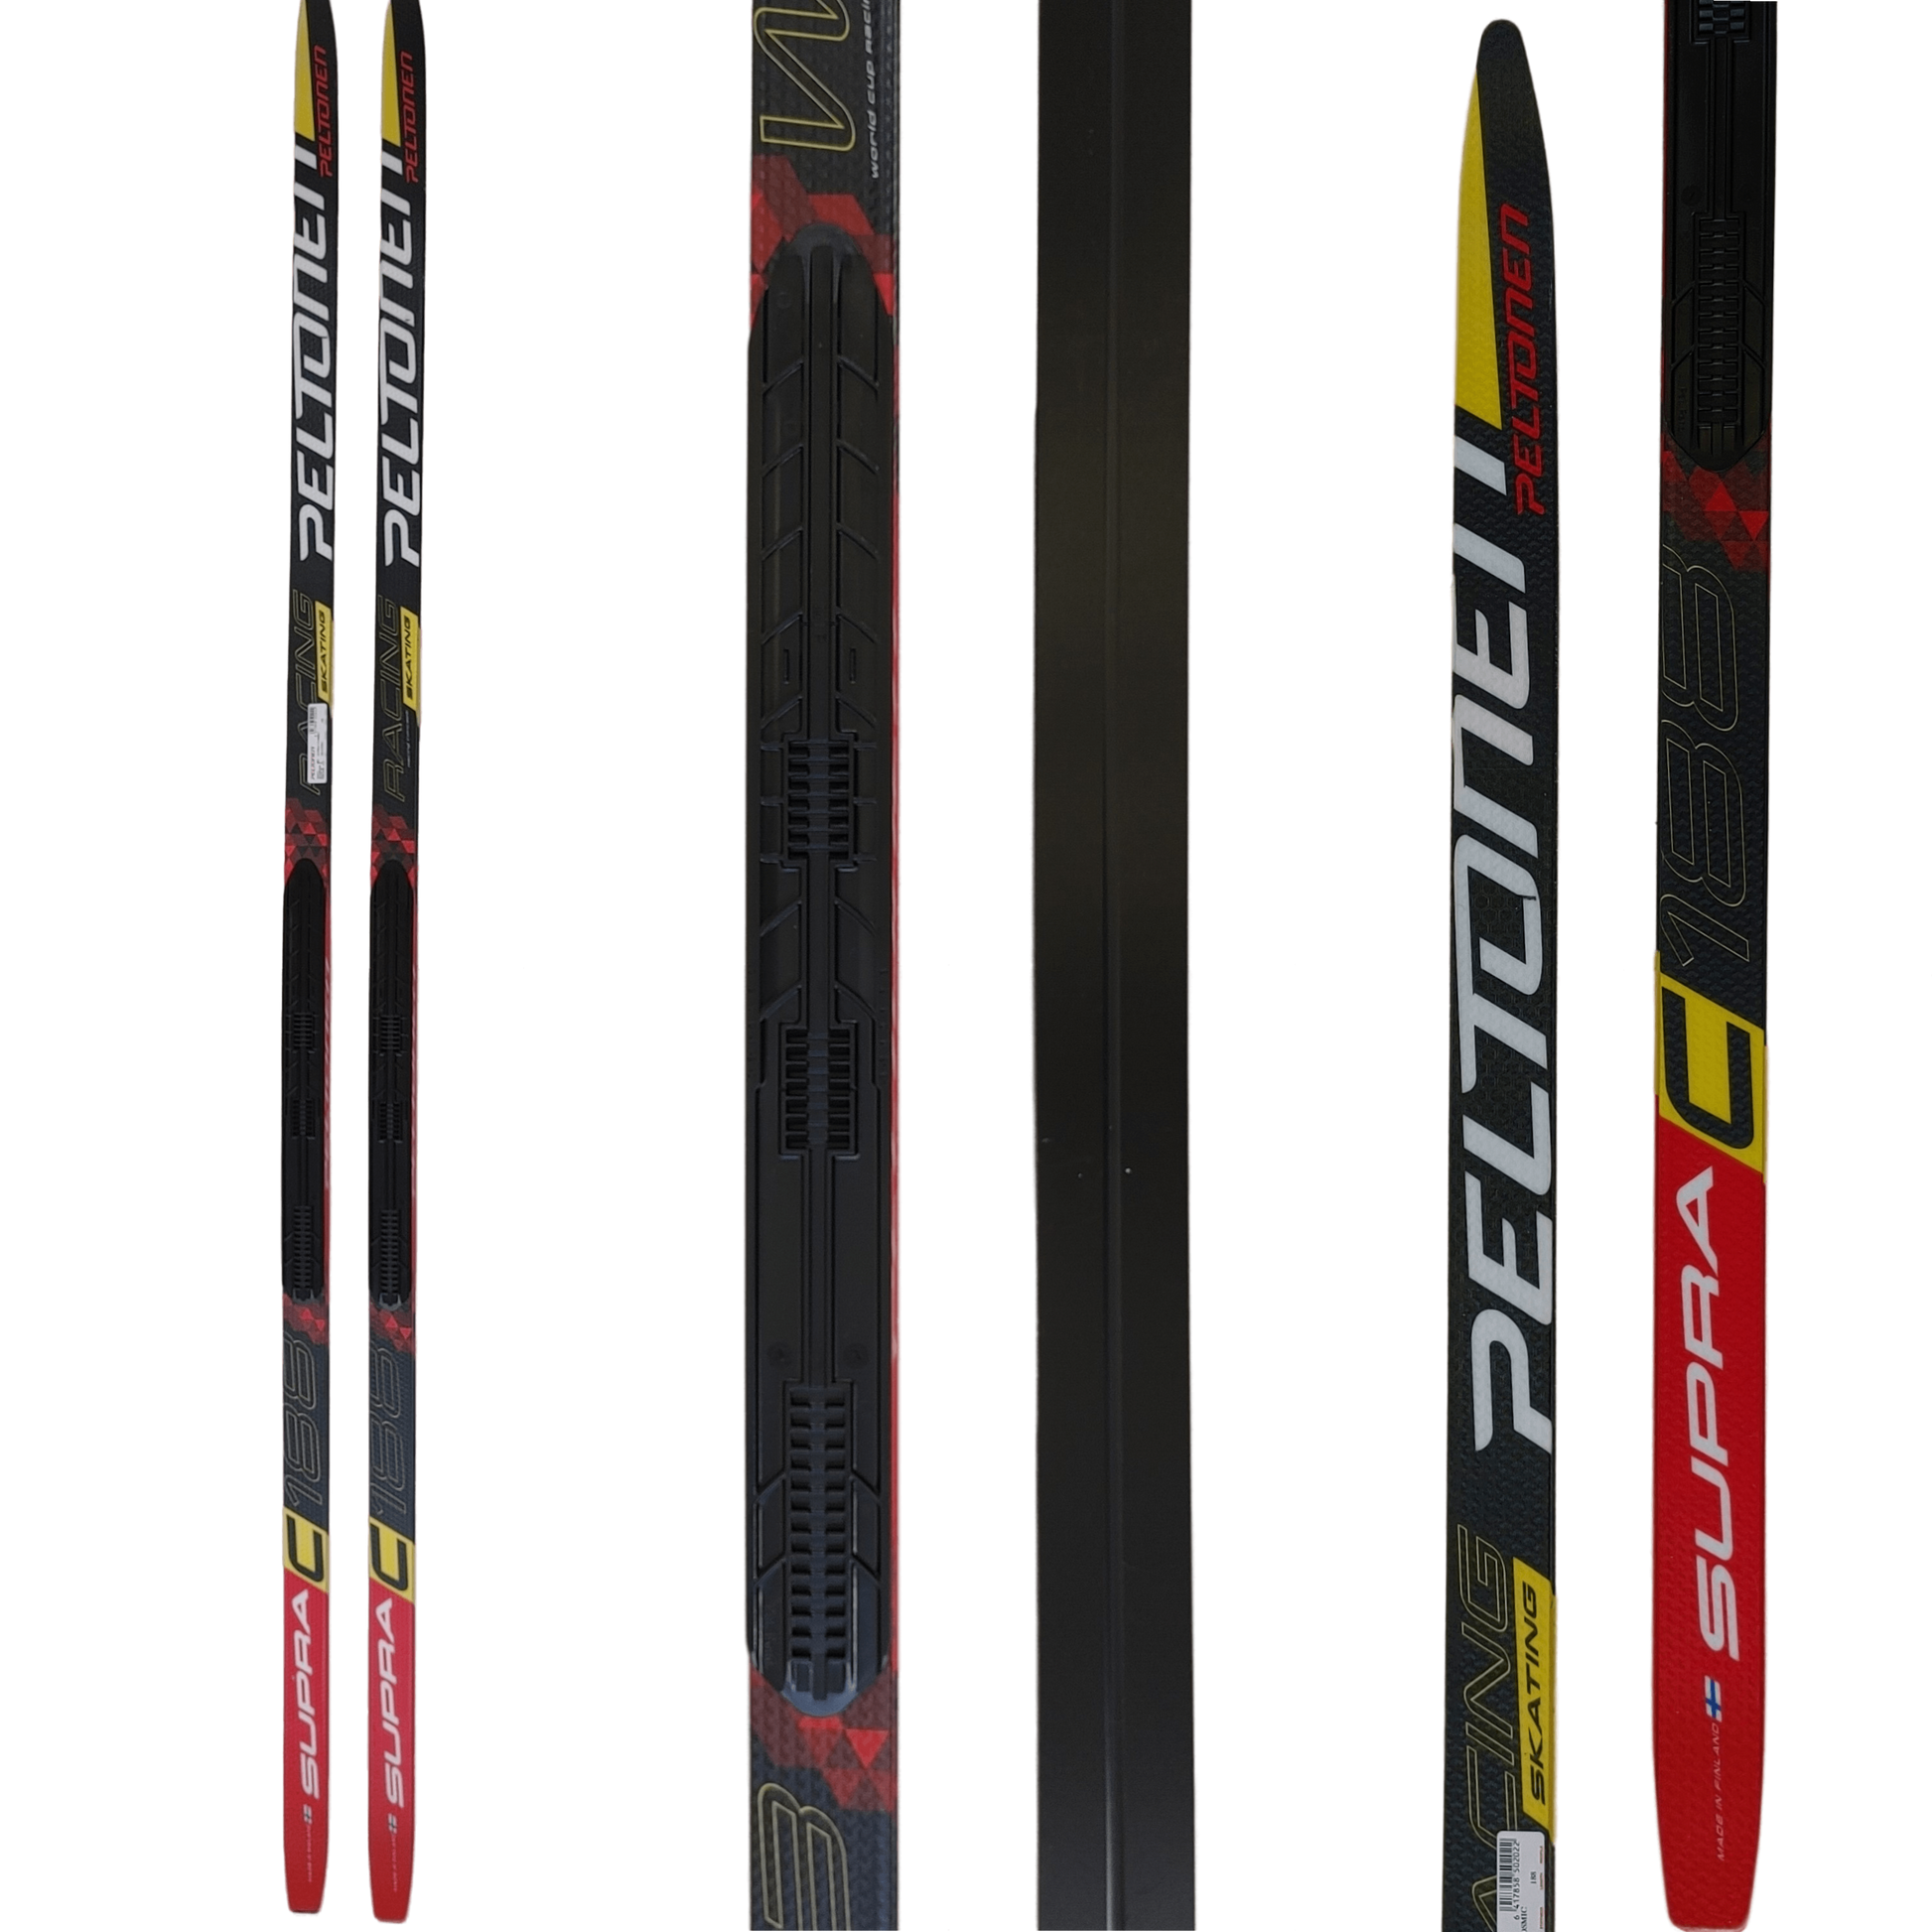 A product picture of the Peltonen SUPRA C 2020 Skate Skis B-GRADE MINOR DEFECTS